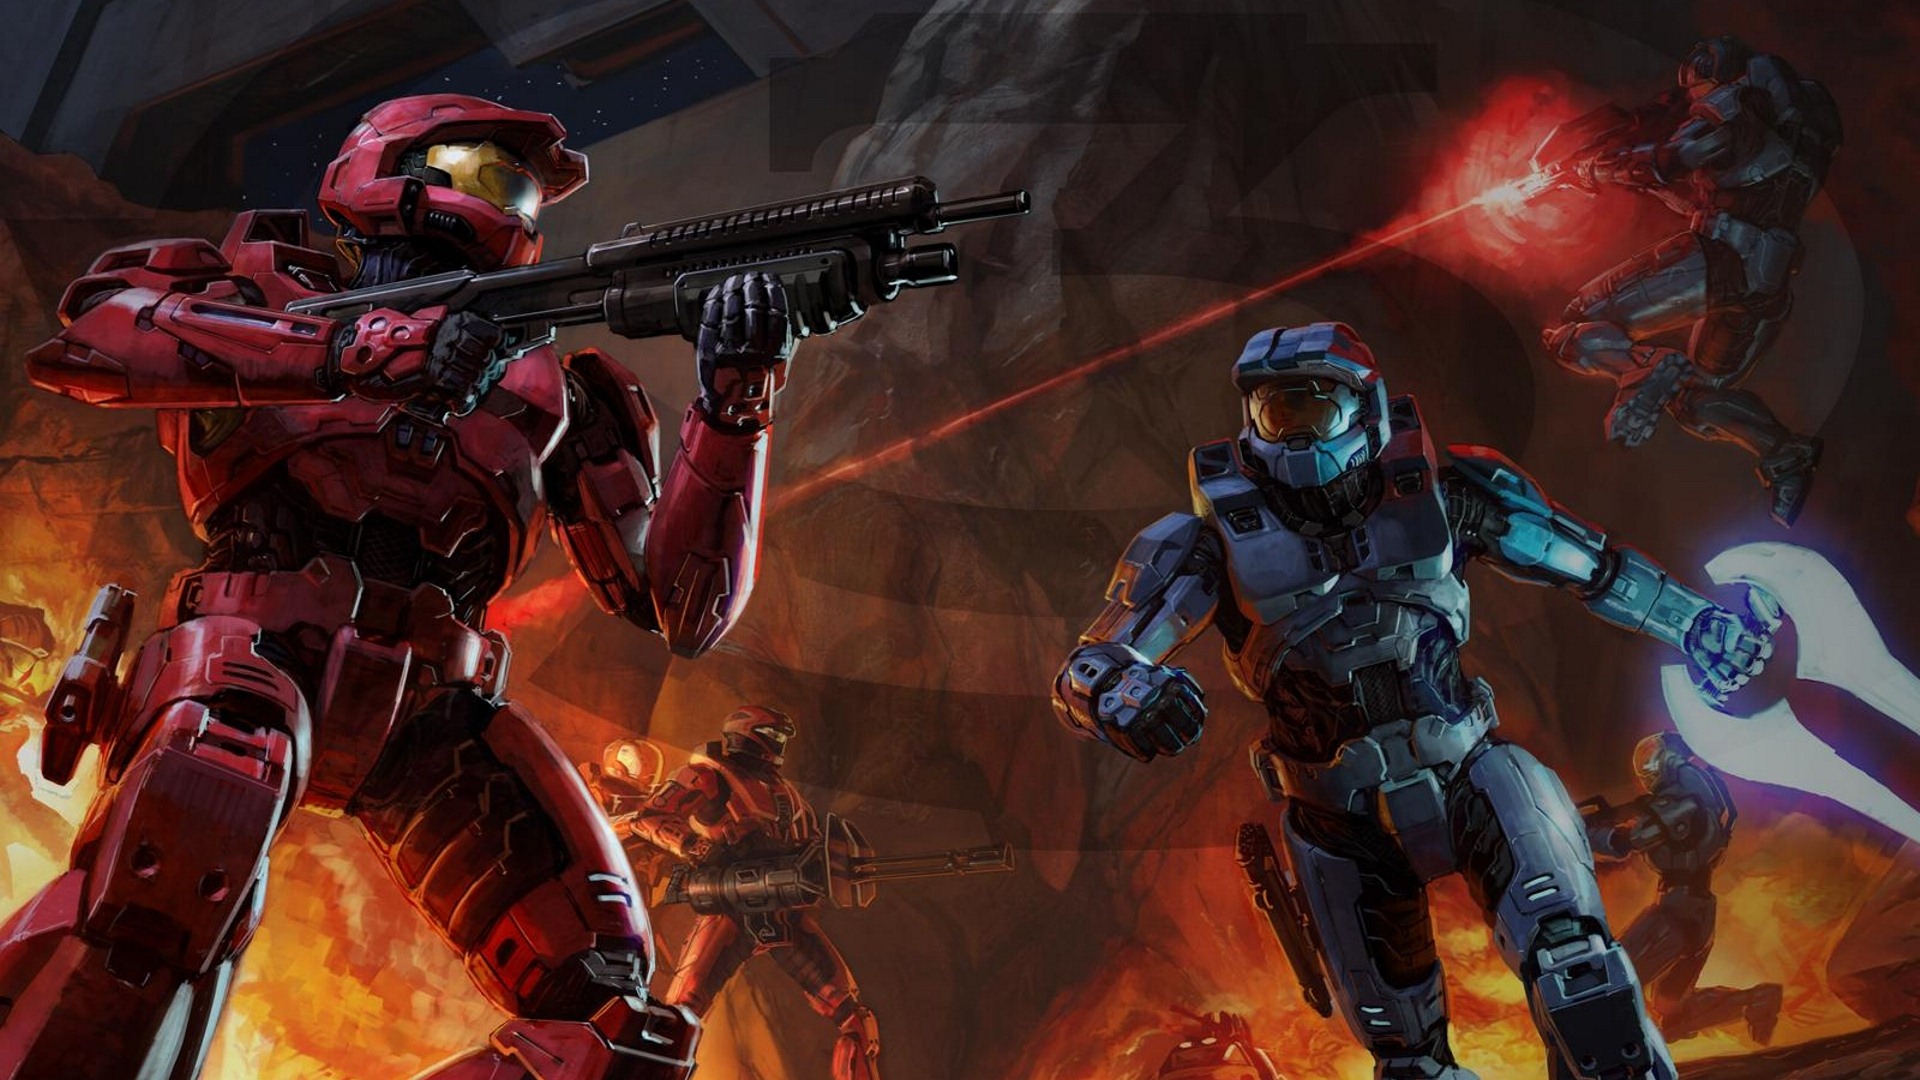 Halo game HD wallpapers #9 - 1920x1080